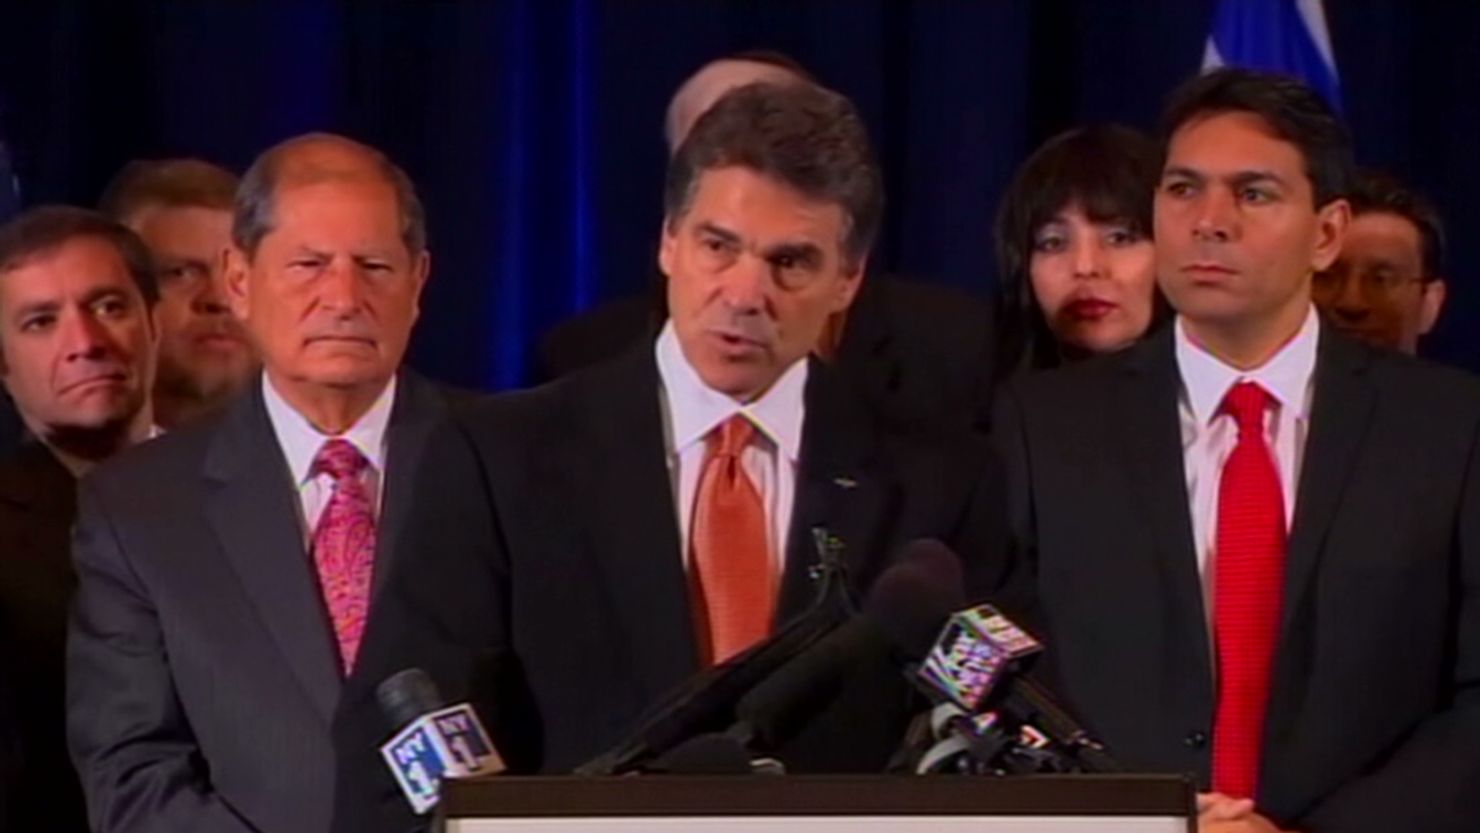 Texas governor and presidential contender Rick Perry criticized Obama's policy on Israel.